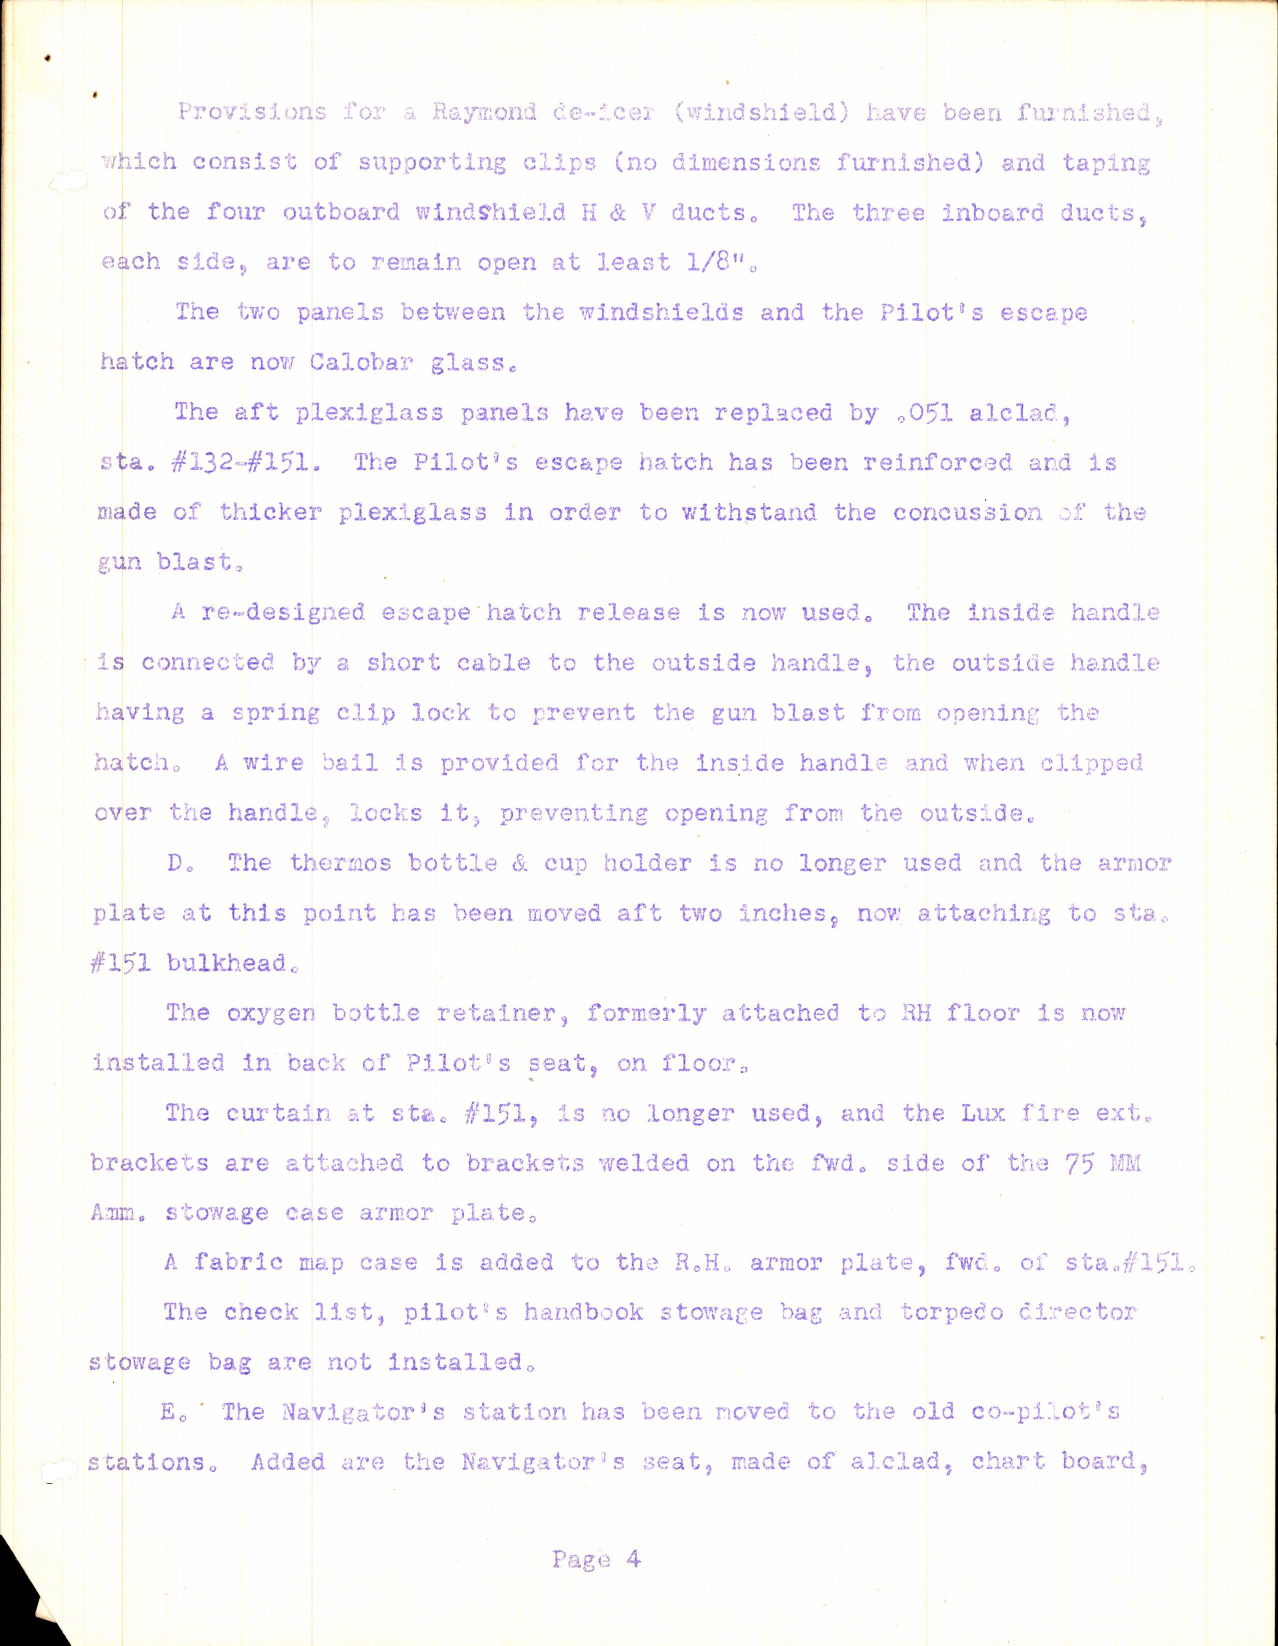 Sample page 7 from AirCorps Library document: Review of Mechanical Changes for B-25H #1 and Subs